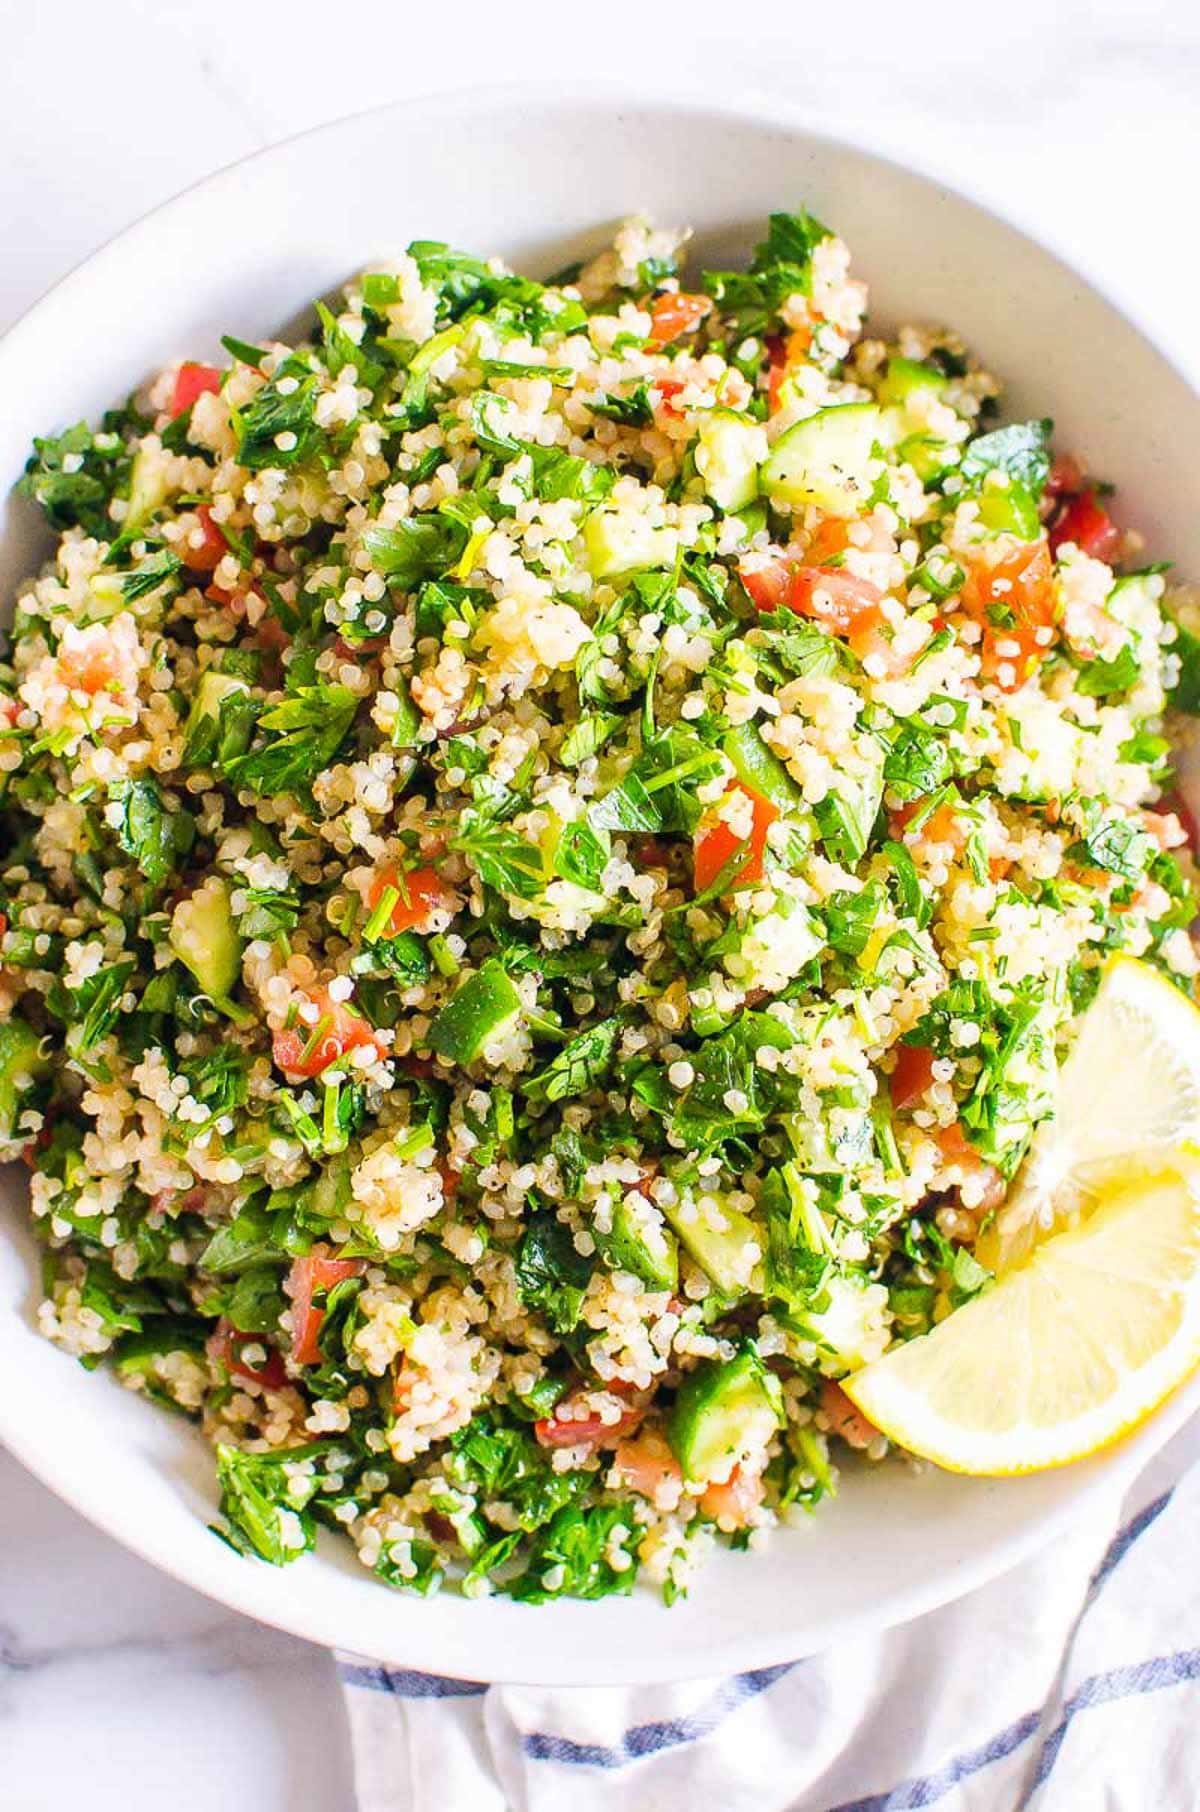 Quinoa tabbouleh with cucumber, tomato, mint, parsley and lemon wedges.